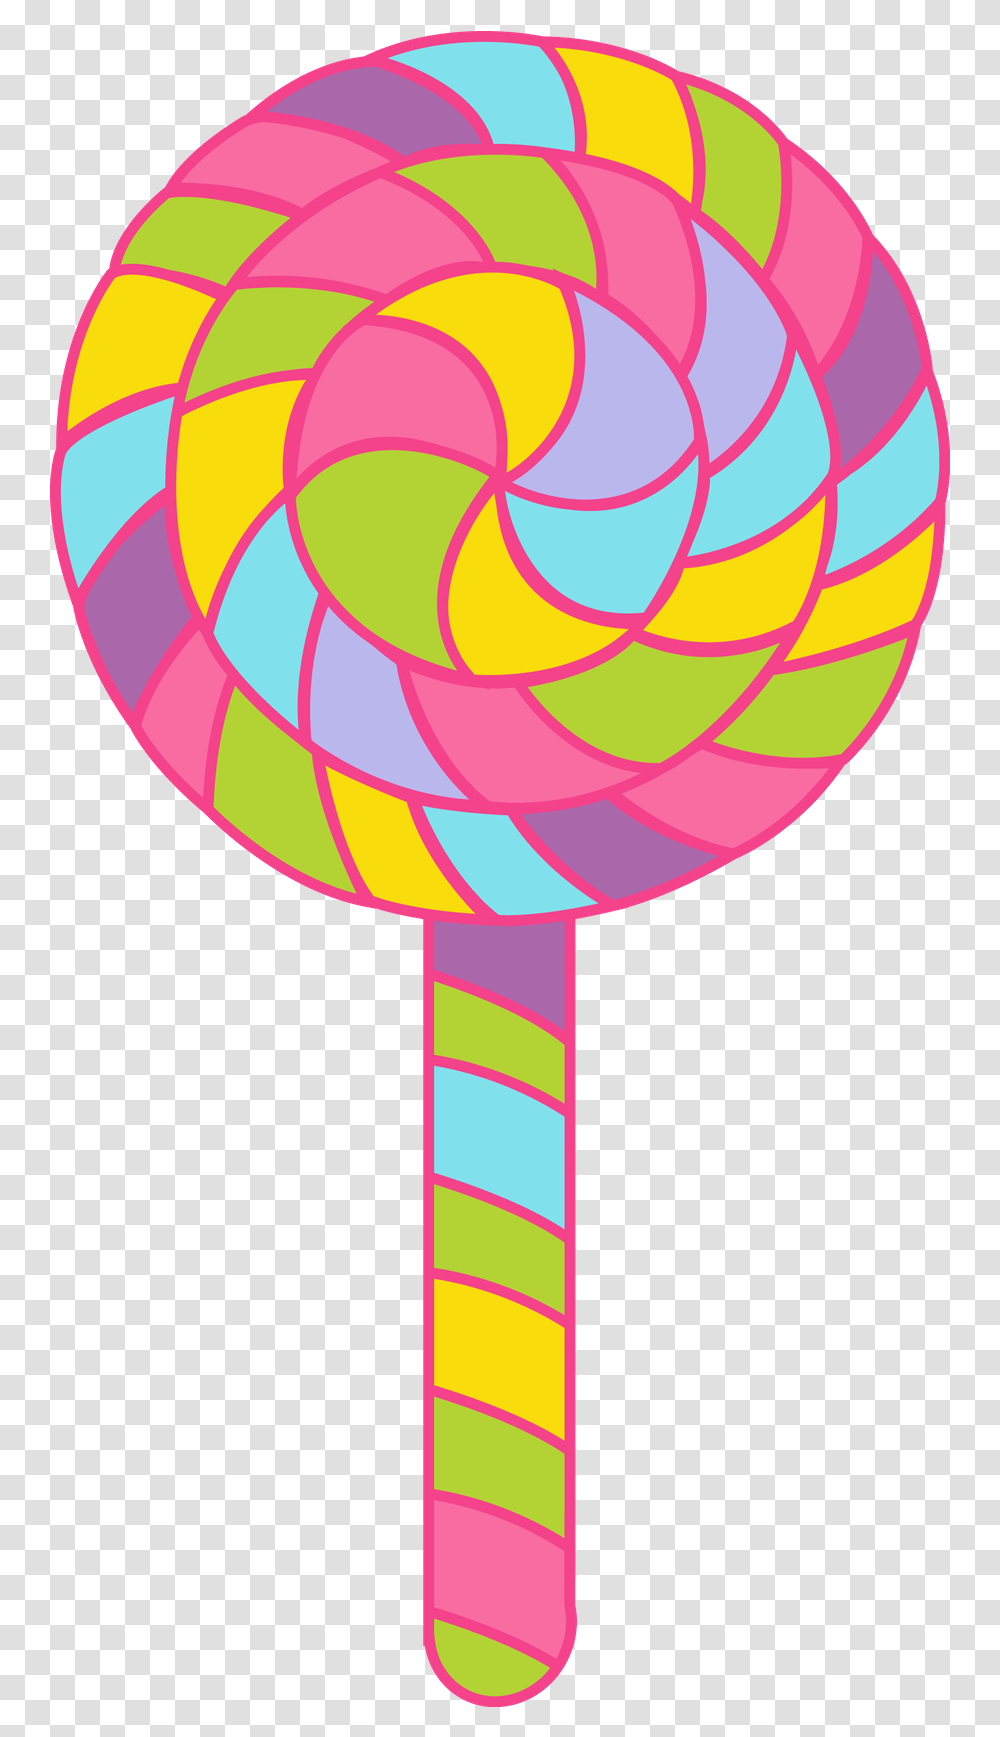 Minus Say Hello Candyland Birthday Candy Party Candyland Candies Clip Art, Food, Lollipop, Sweets, Confectionery Transparent Png